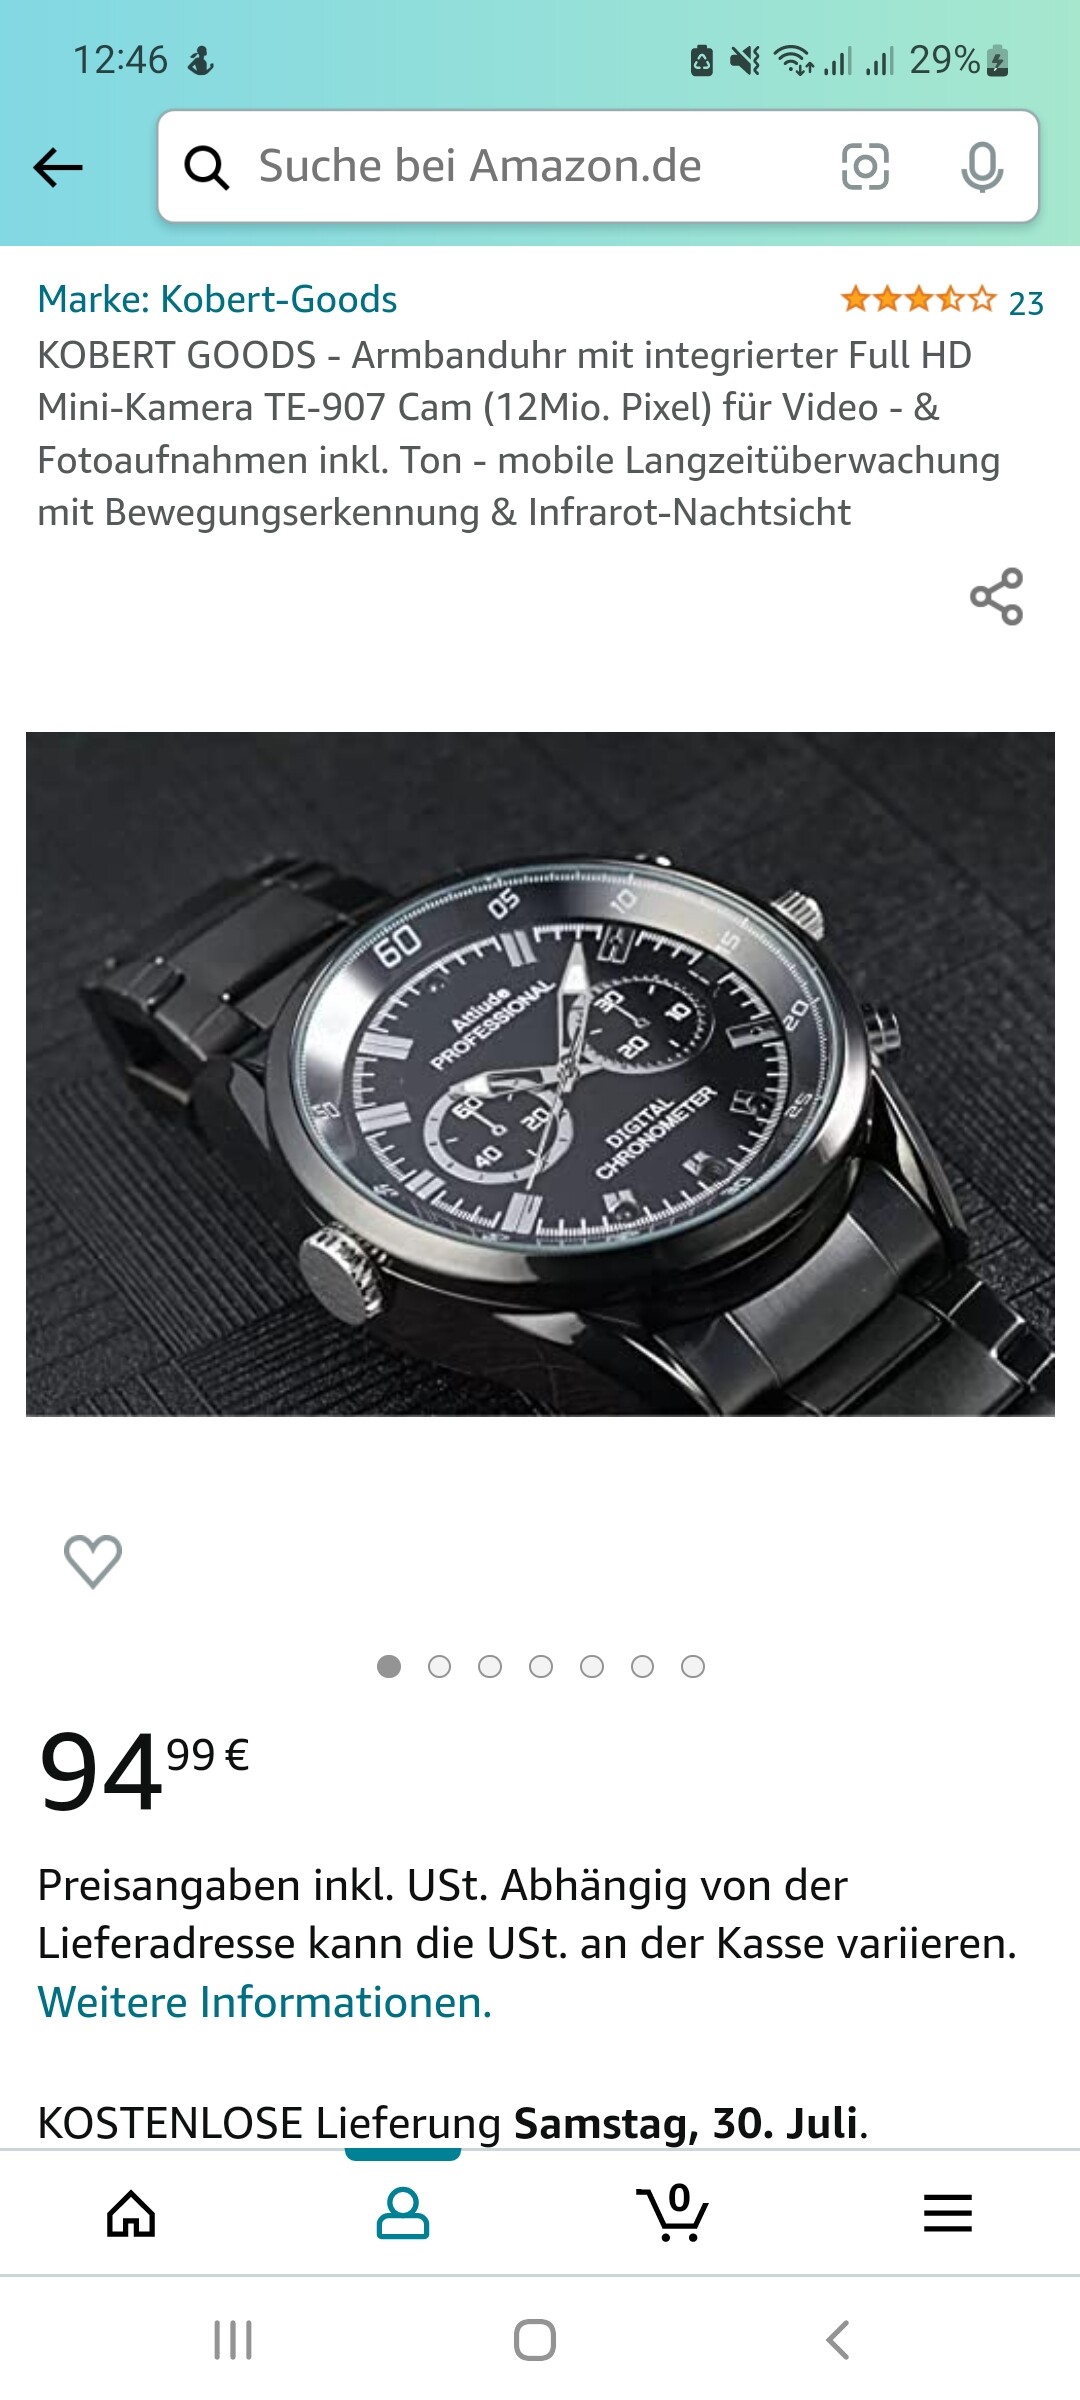 Worth buying a watch cam? - Equipment, Shooting Techniques & Everything ...